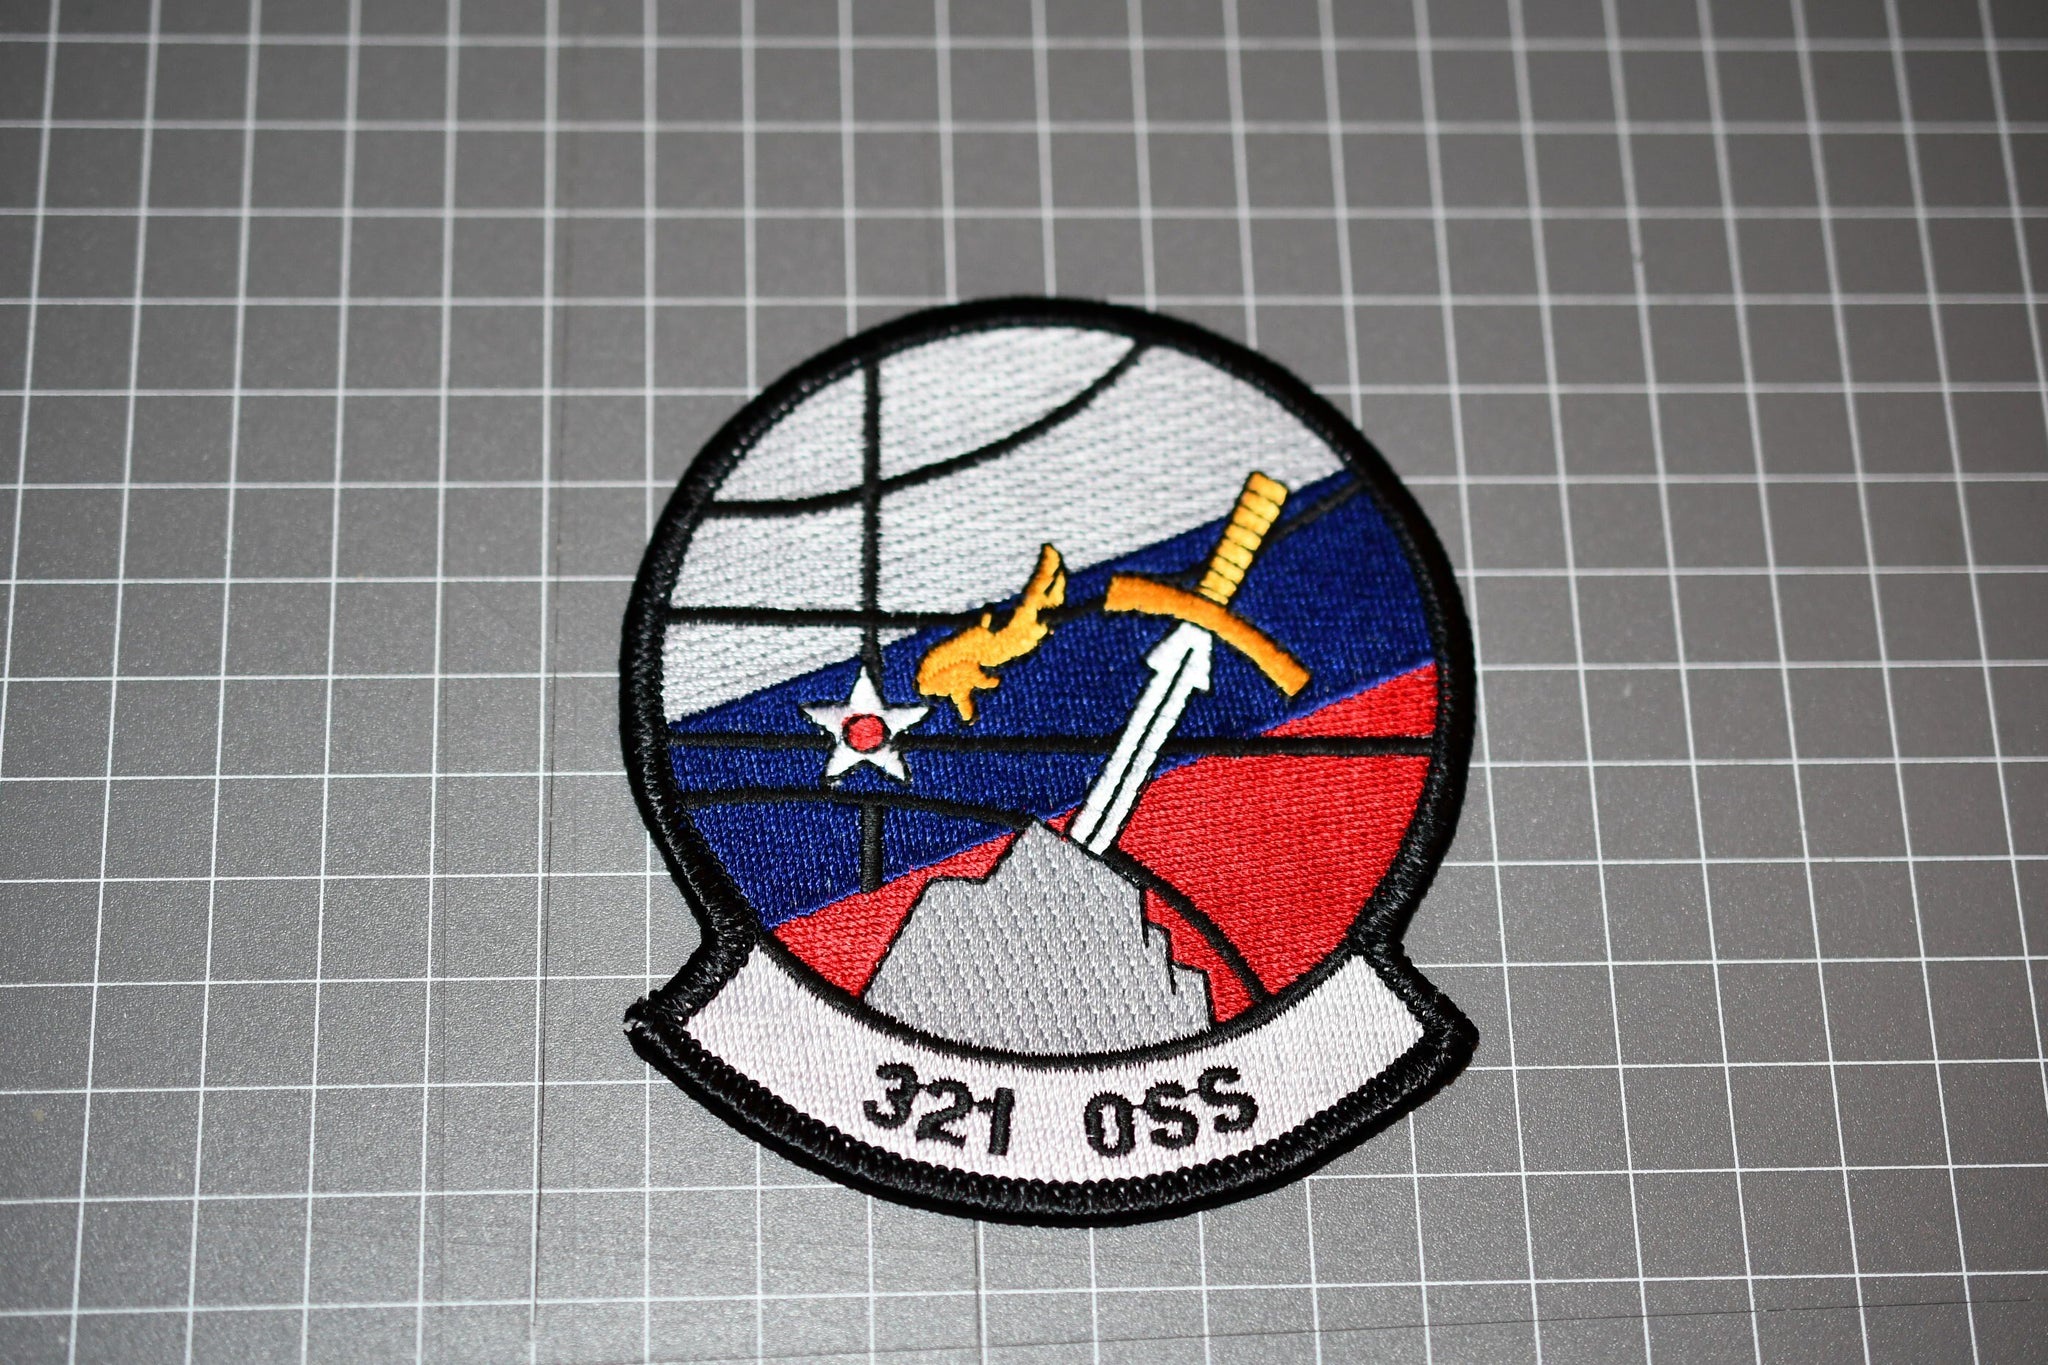 United States Air Force 321st Operational Support Squadron Patch (B9)